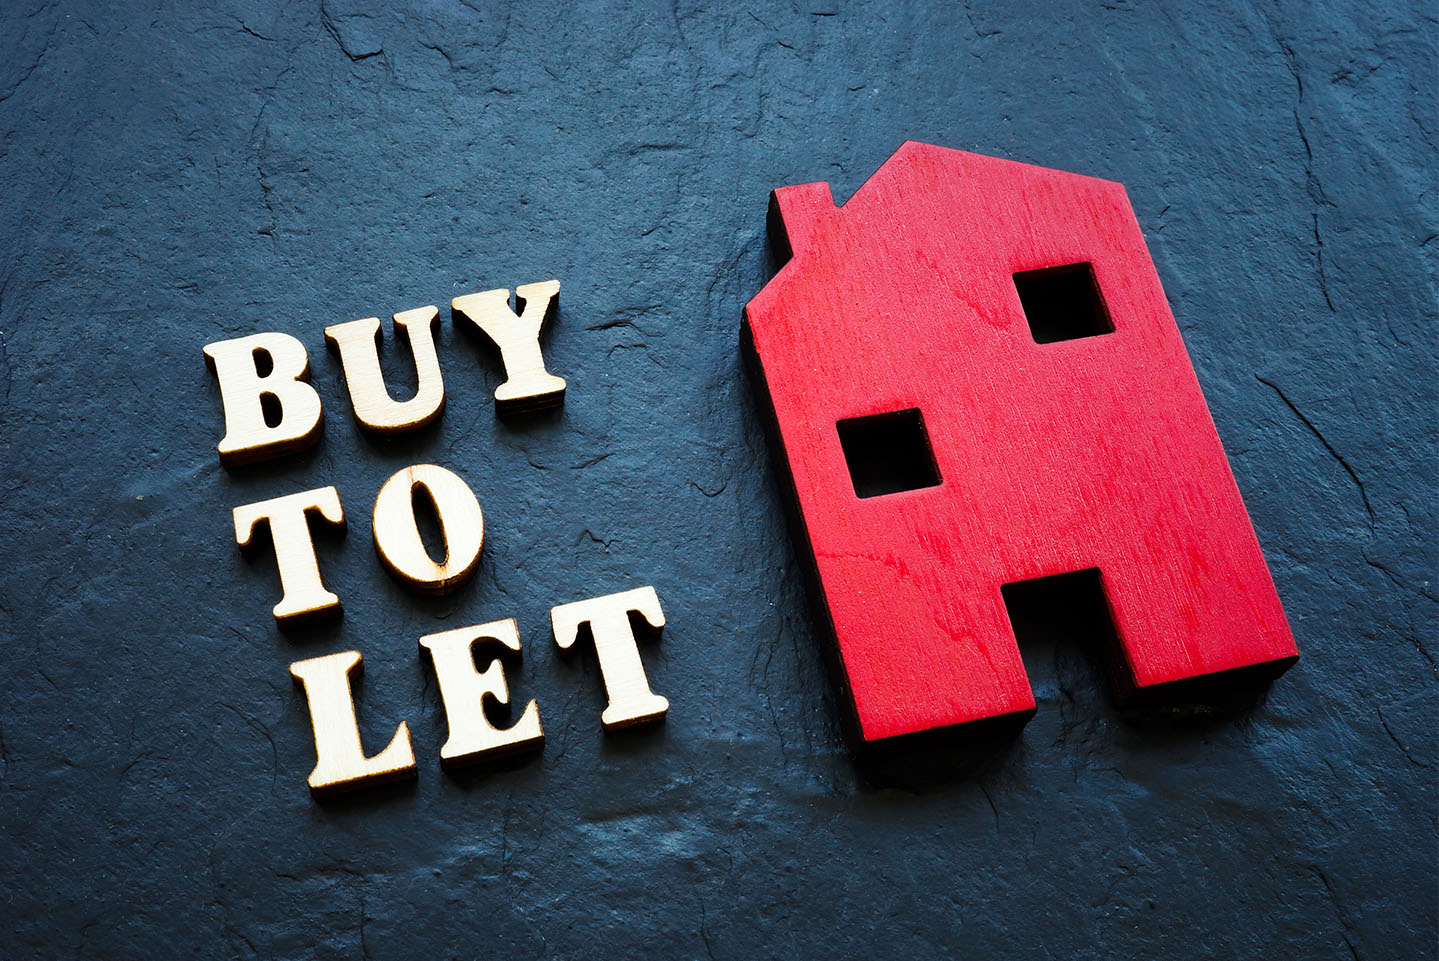 Image showing the words "Buy-to-let" next to a model house